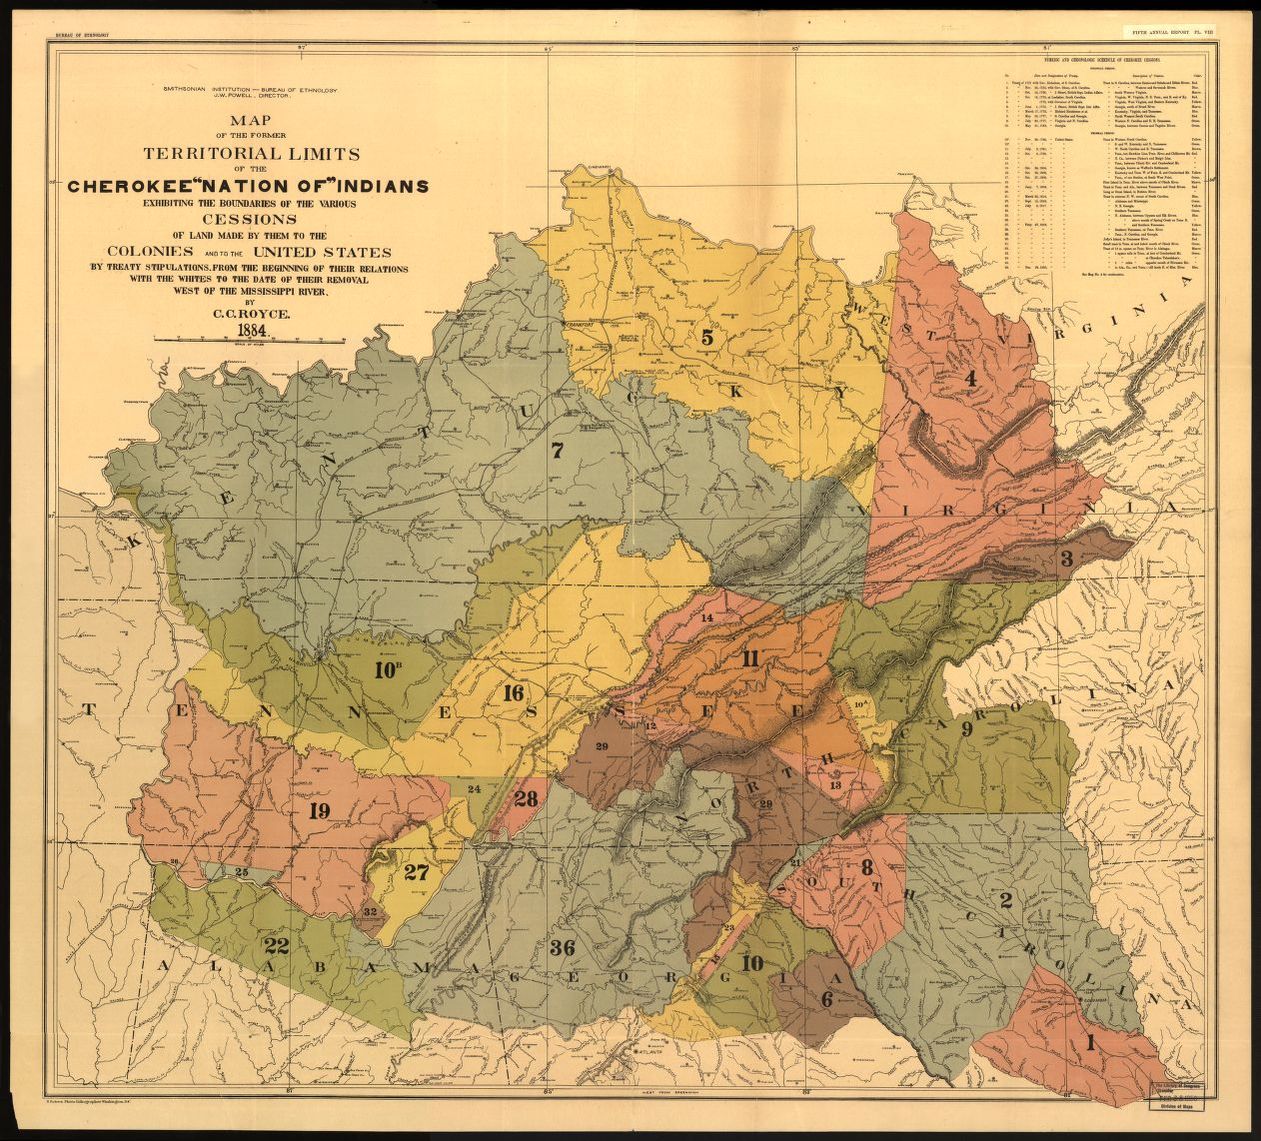 Royce, C. C. Map of the former territorial limits of the Cherokee "Nation of" Indians ; Map showing the territory originally assigned Cherokee "Nation of" Indians. [S.l, 1884] Map. https://www.loc.gov/item/99446145/.